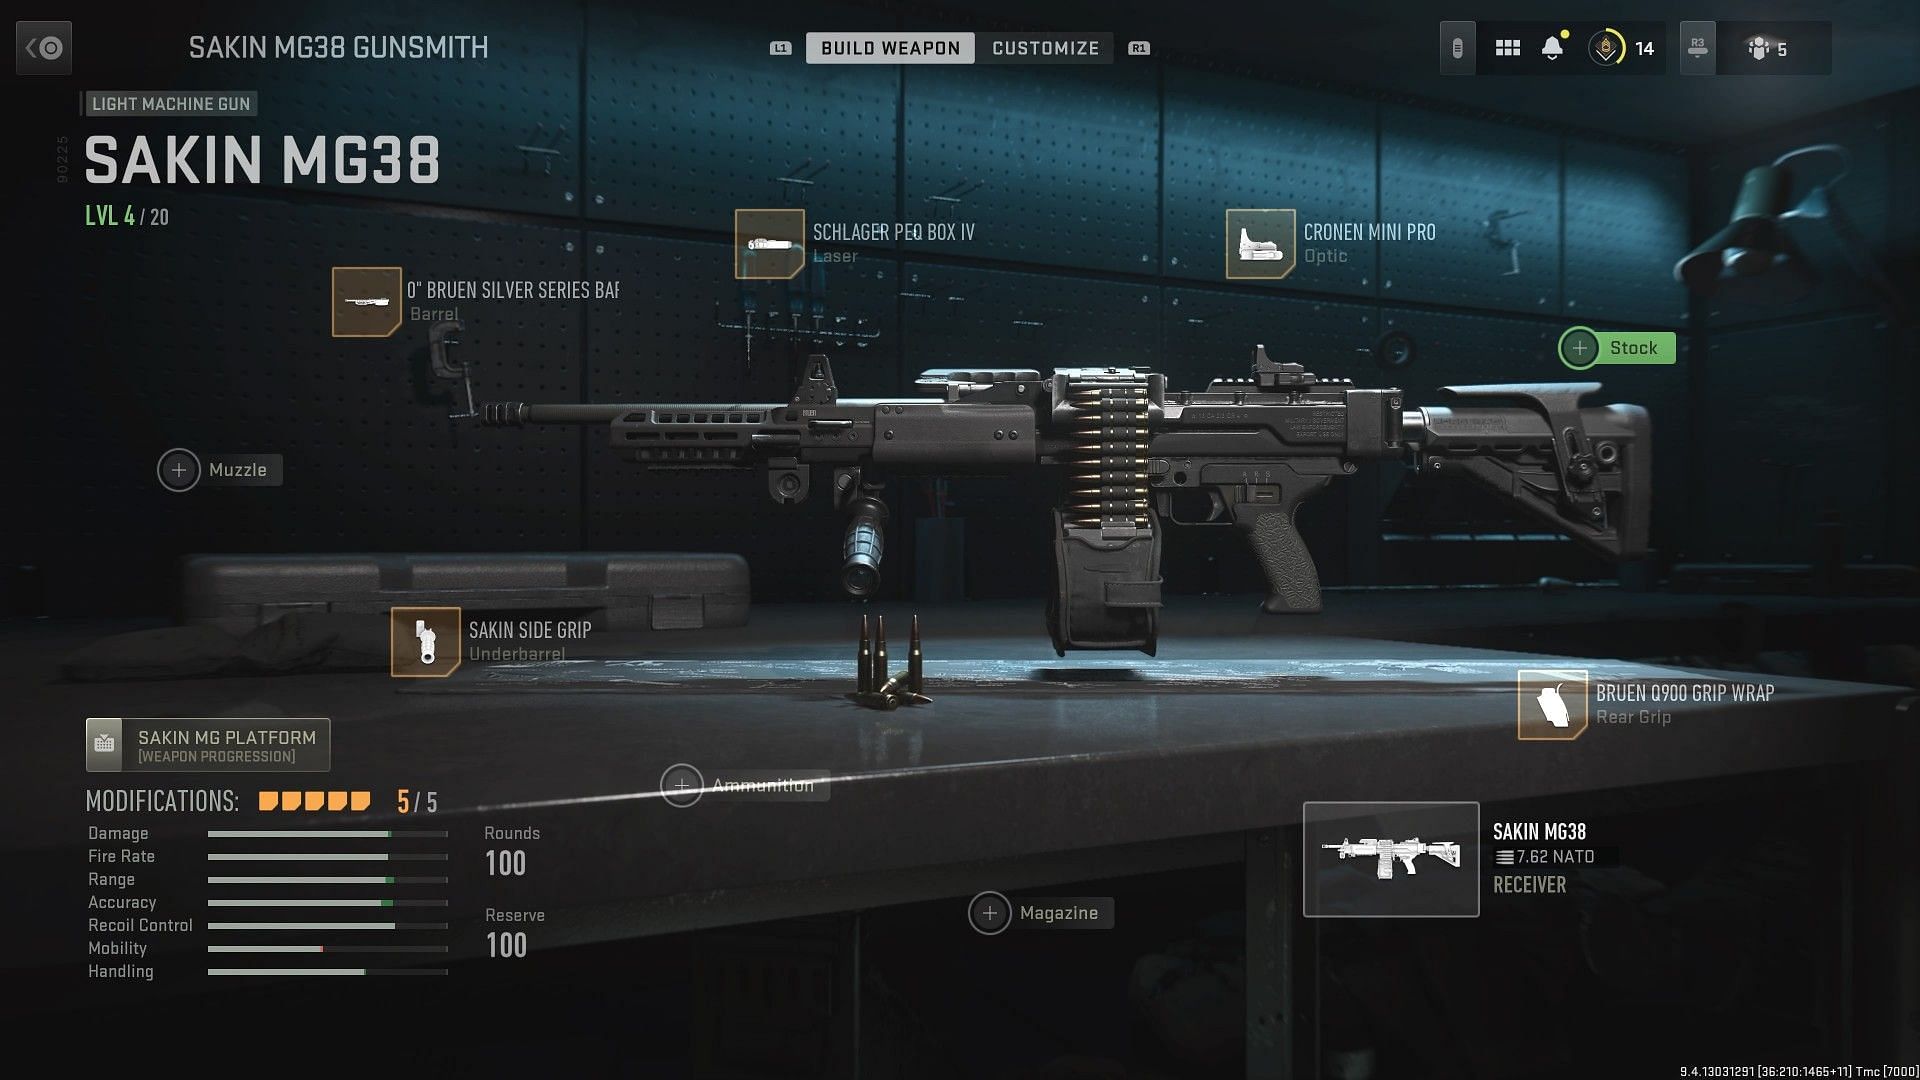 SAKIN MG38 Loadout in MW2 (Image via Activision)